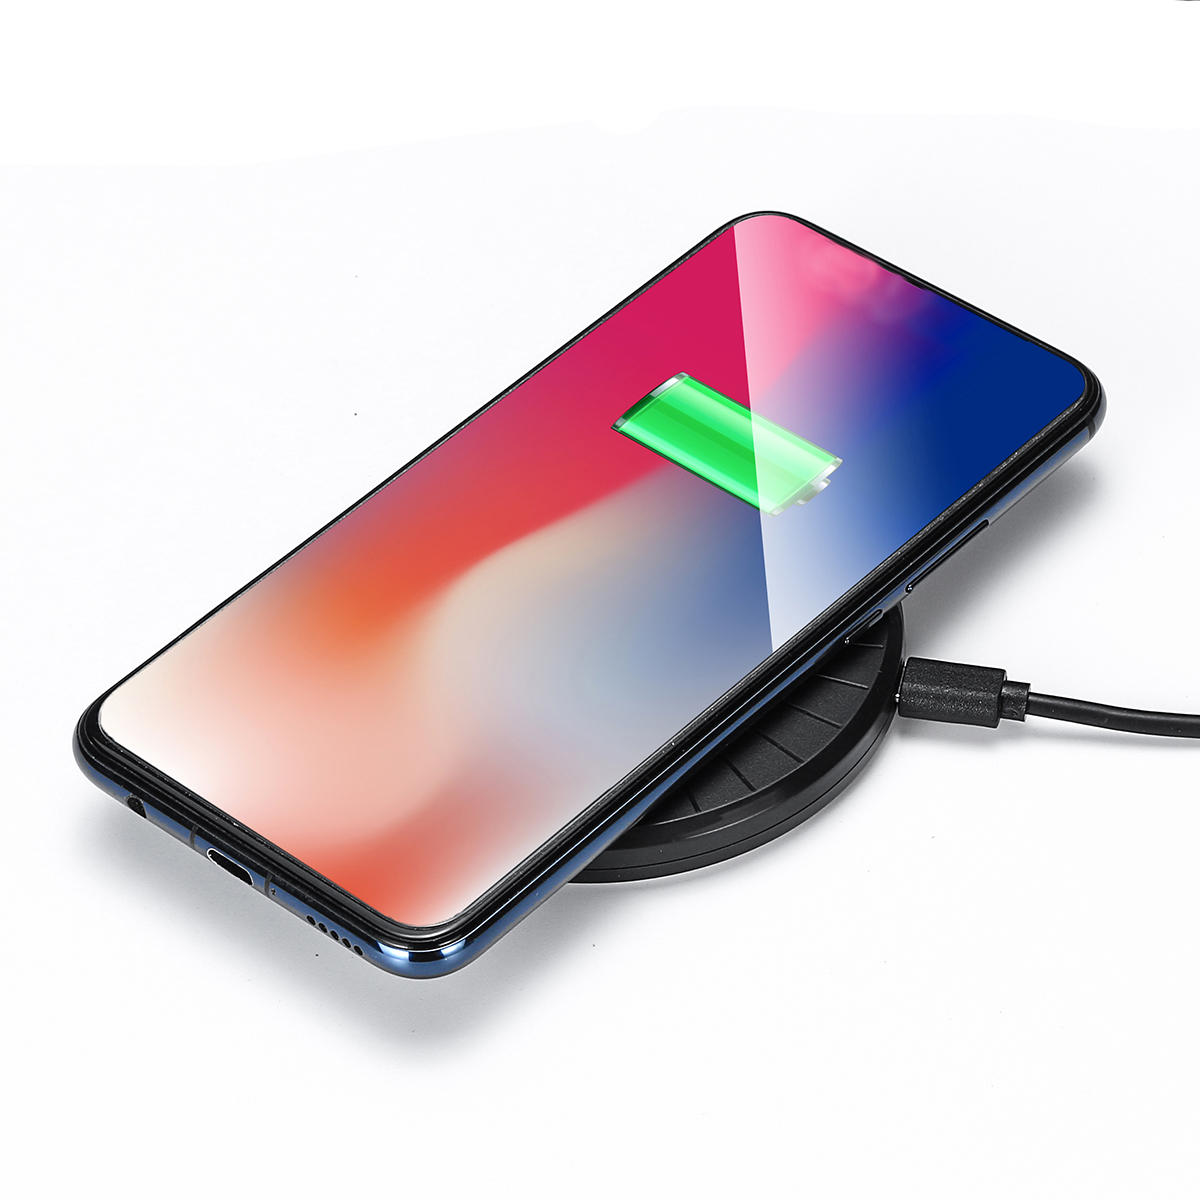 Bakeey 10W Wireless QI Fast Charger Charging Dock Stand Holder Universal For Samsung Galaxy Note 9 S8 S9 S10 Plus For iP